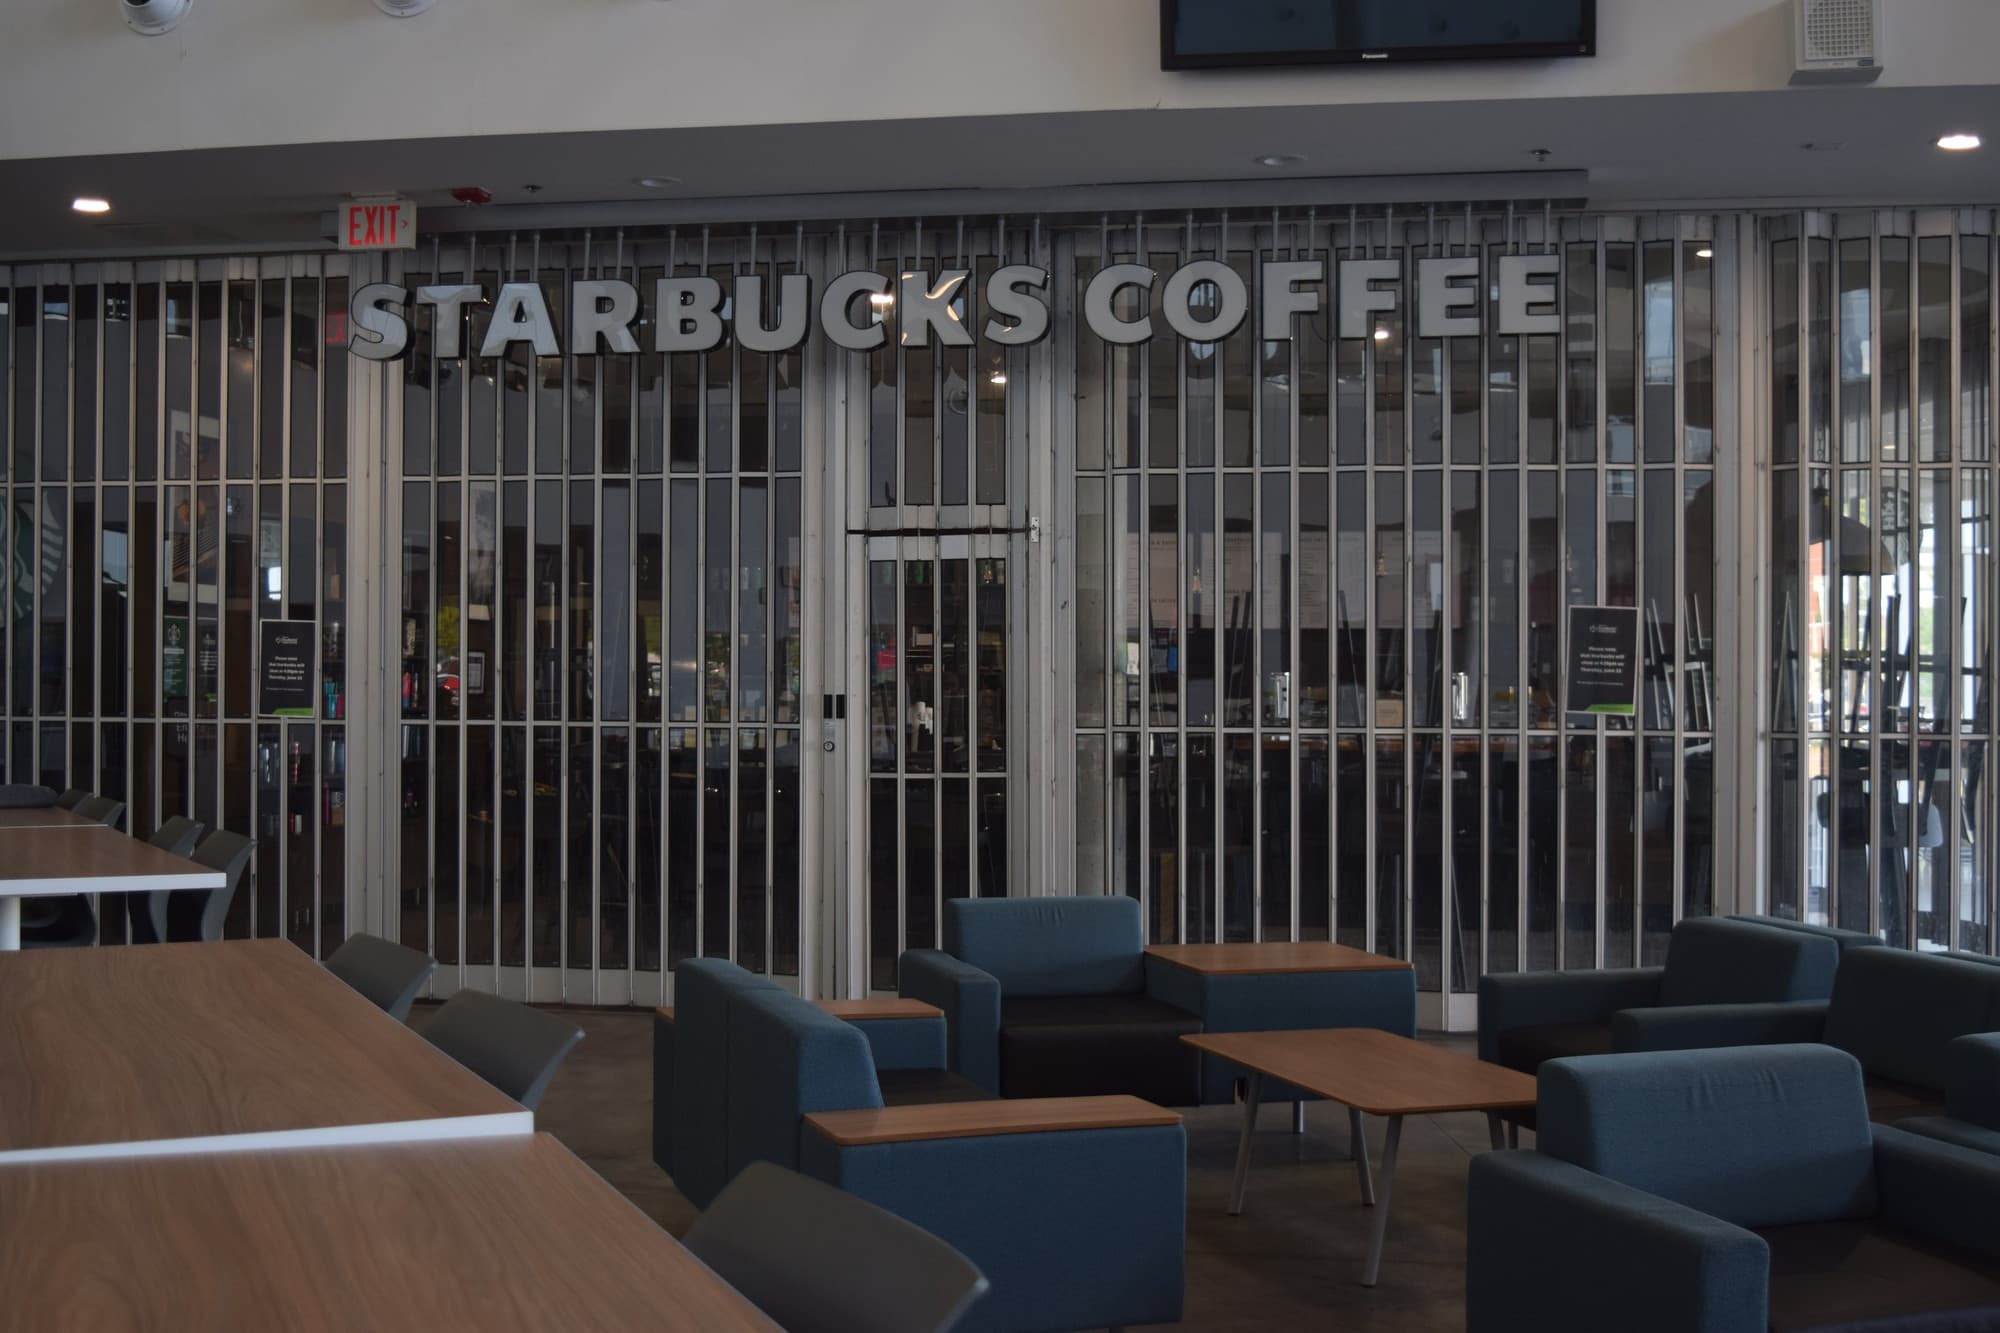 The Starbucks on campus temporarily closed at 5 p.m. on June 23, joining a host of food services  postponed for the summer semester.